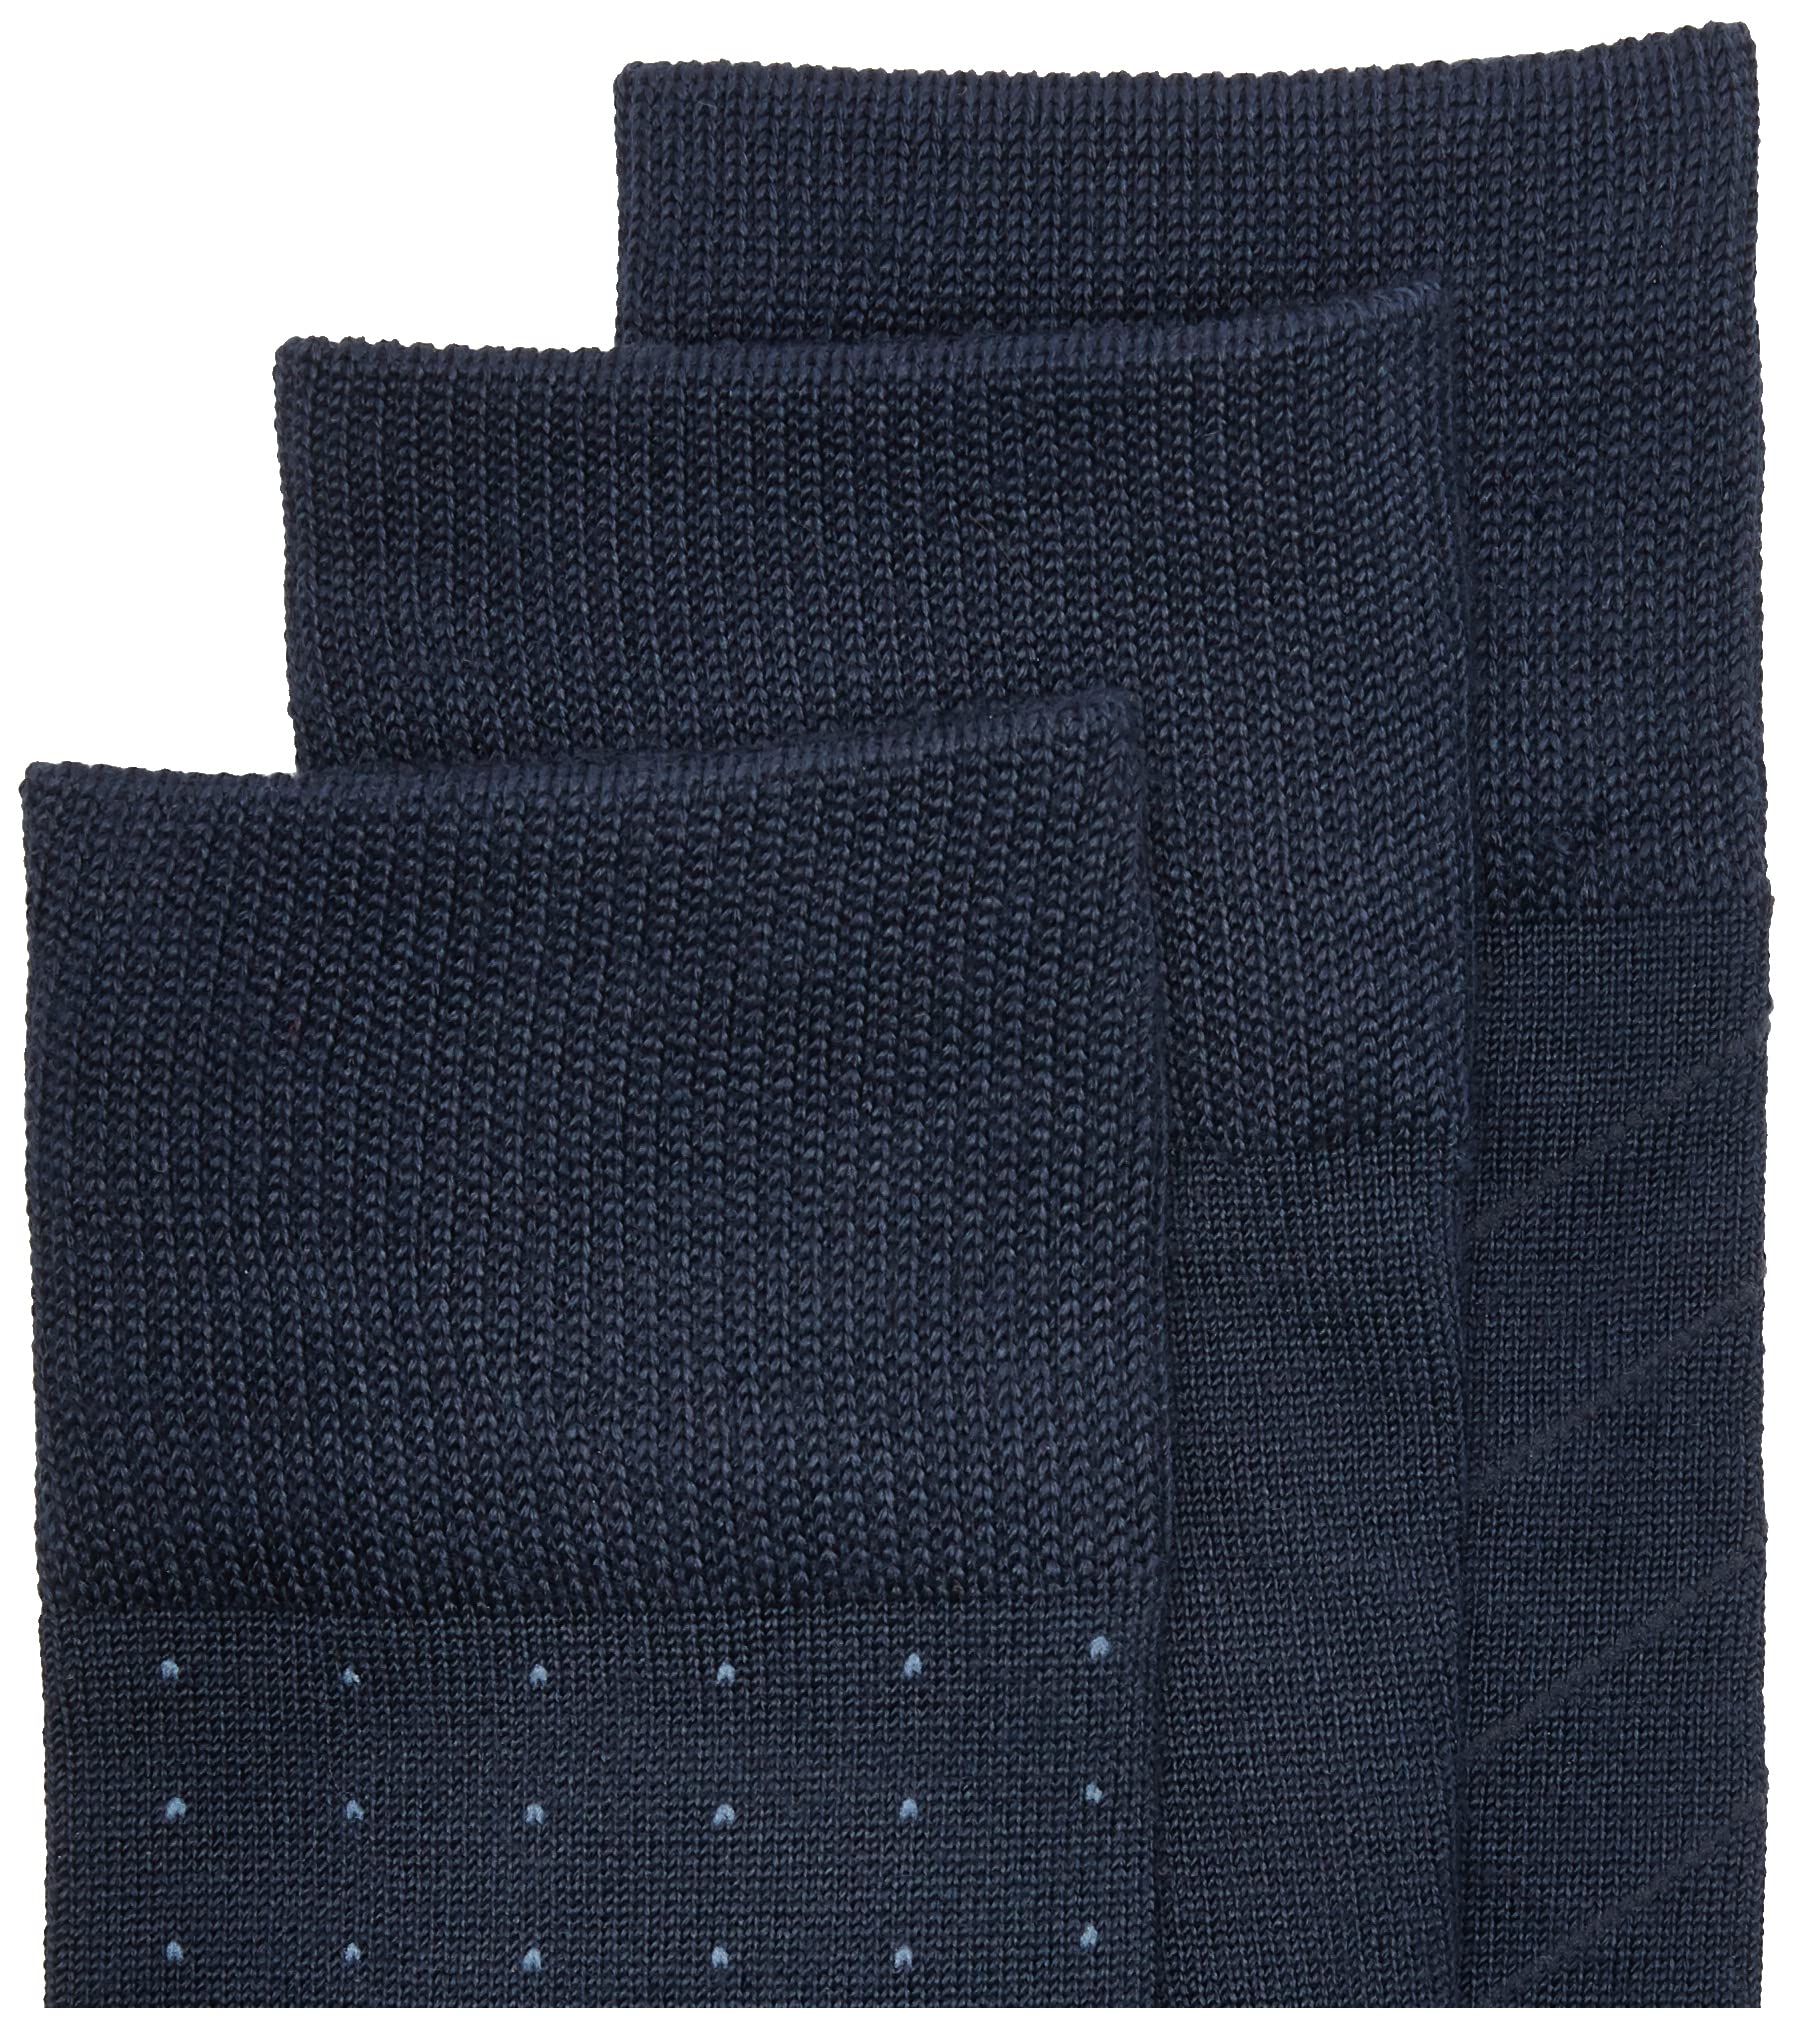 Chaps Men's Super Soft Dress Crew Socks-3 Pair Pack-Patterns and Textures